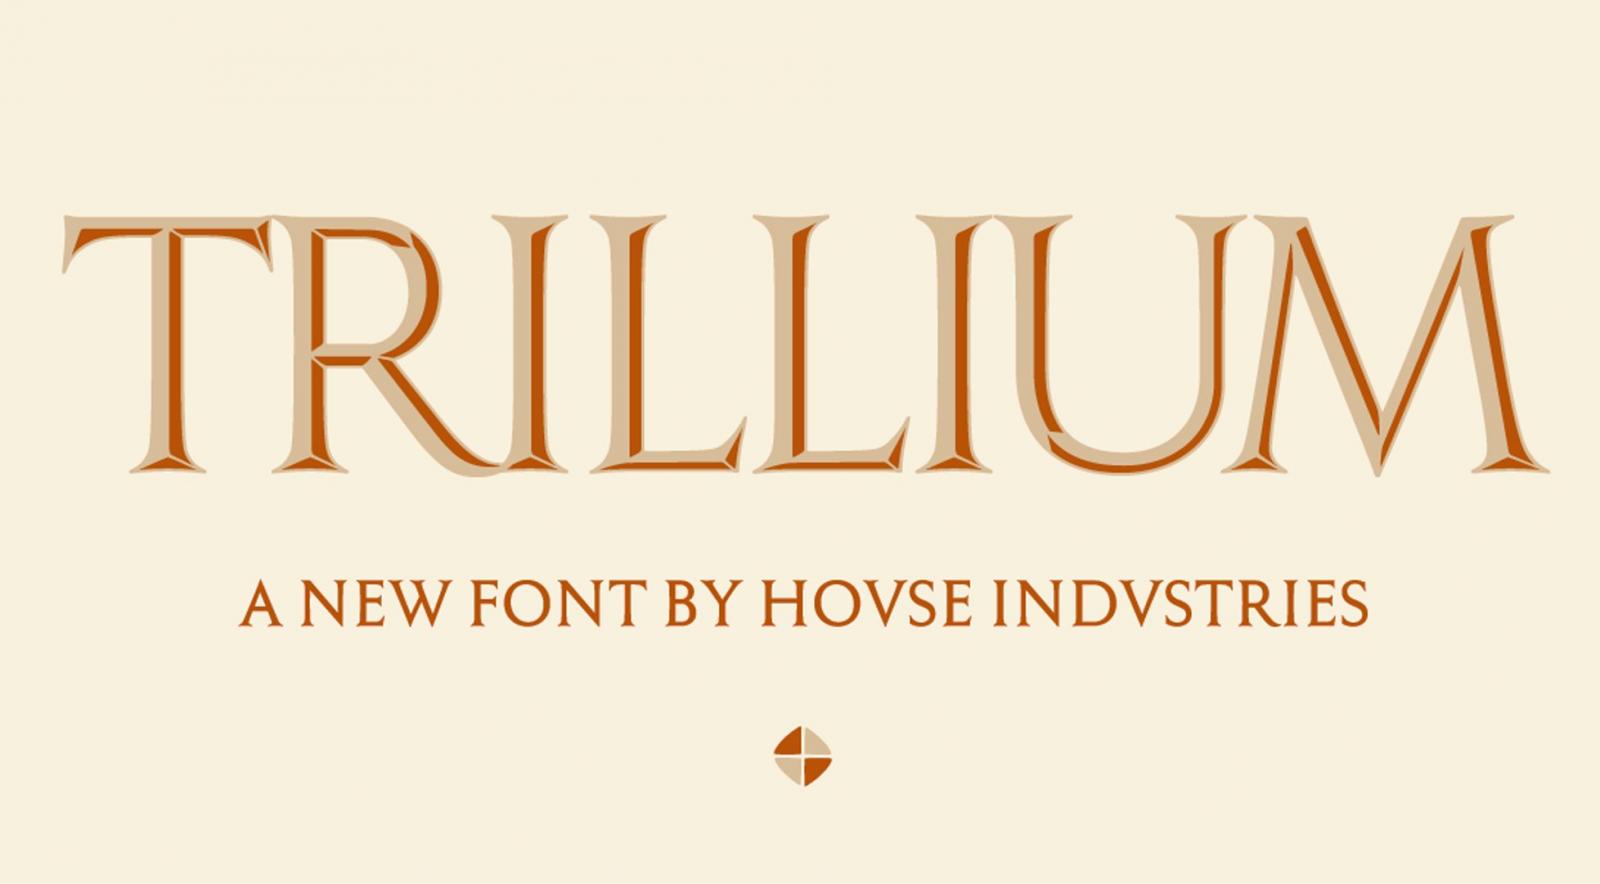 House Industries releases layer font Trillium.